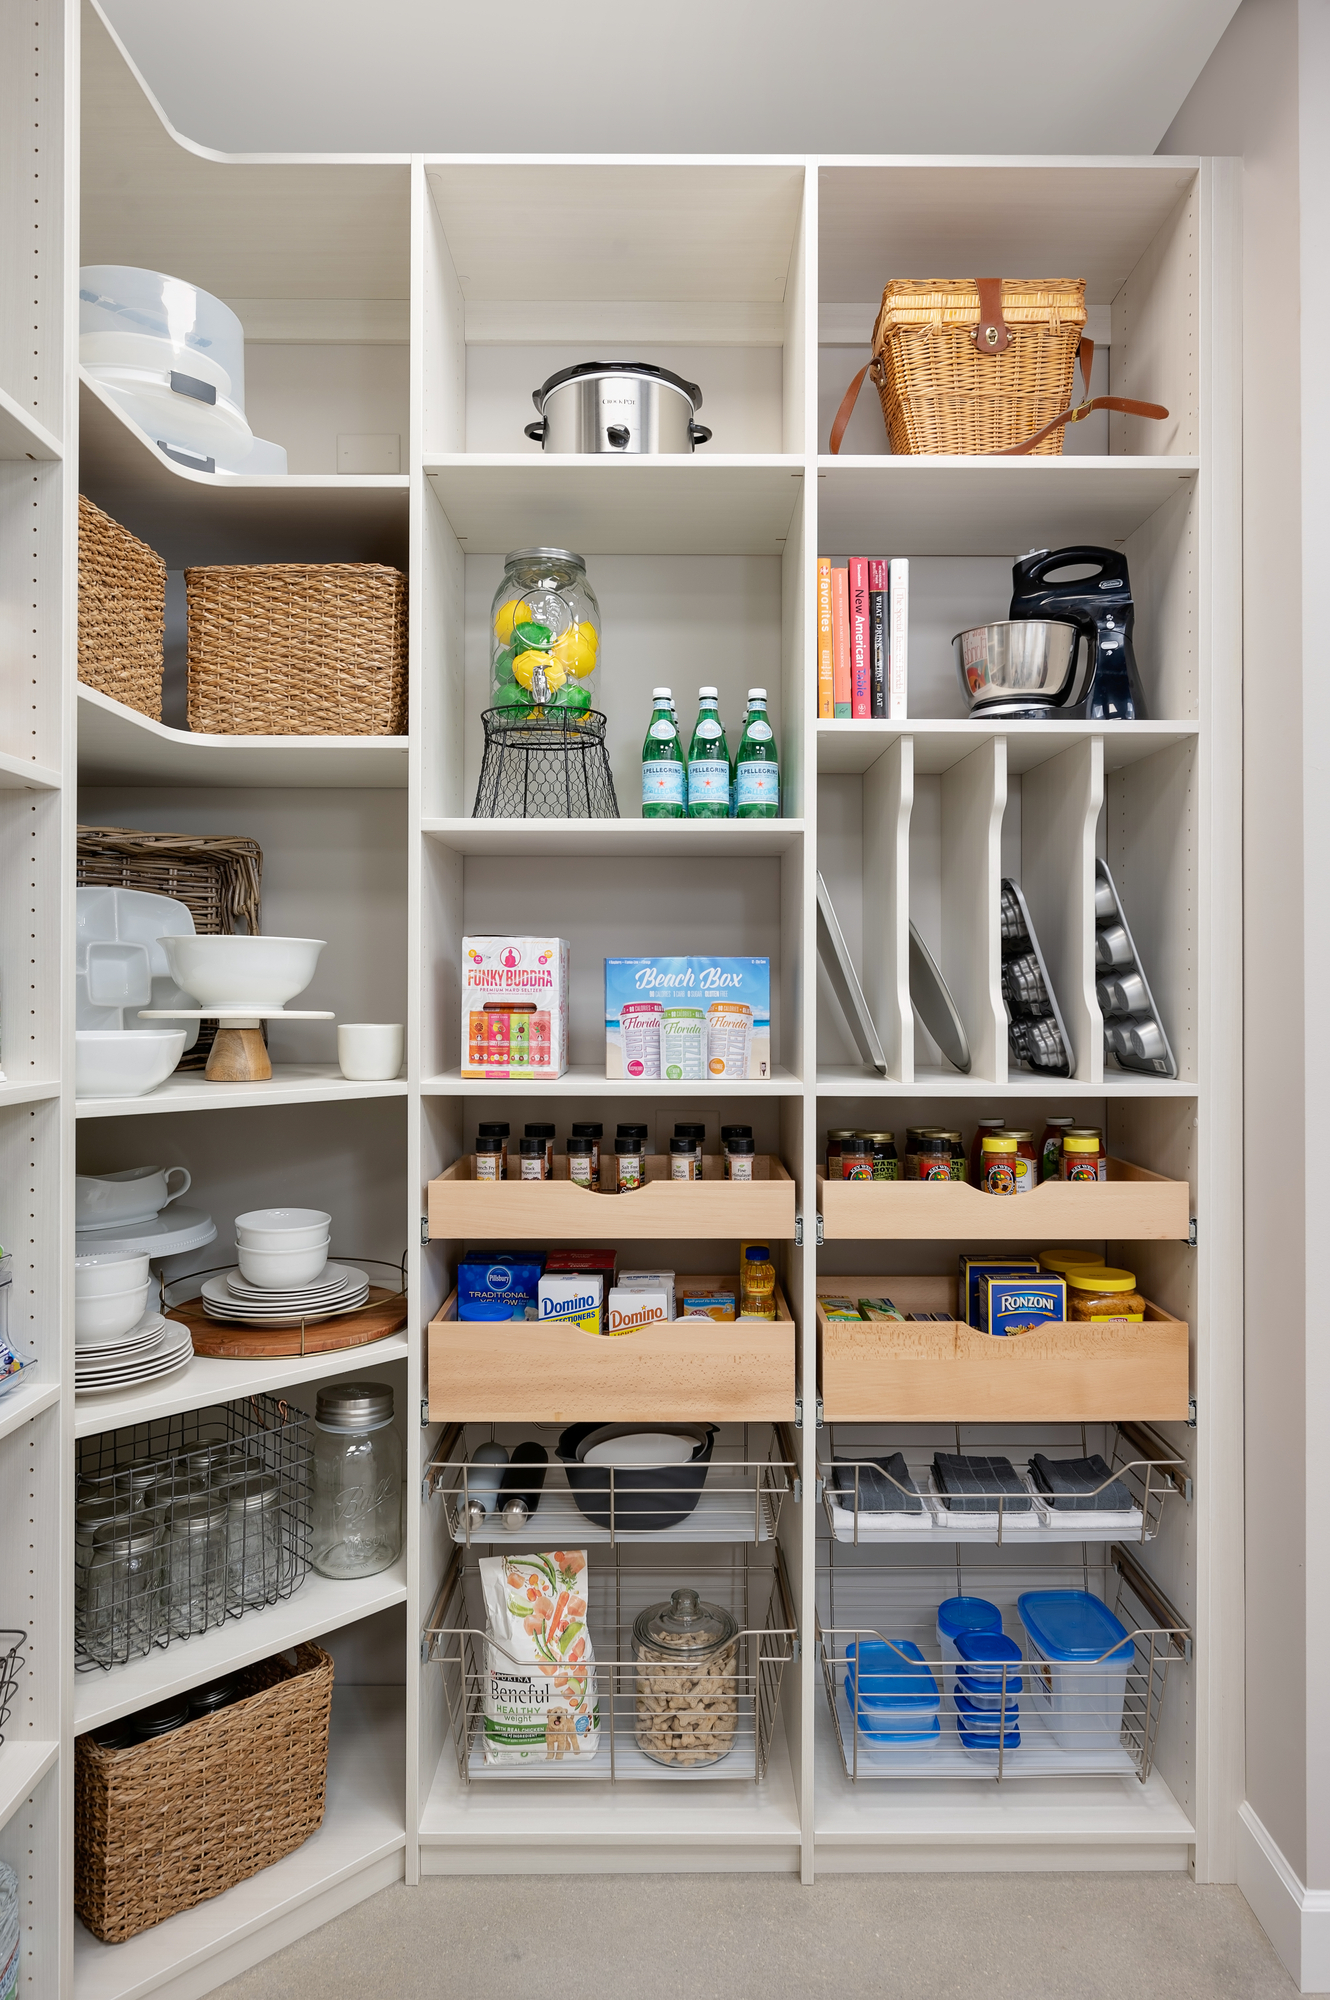 Custom pantry storage system shelving and pull our drawers in Port St. Lucie, Florida